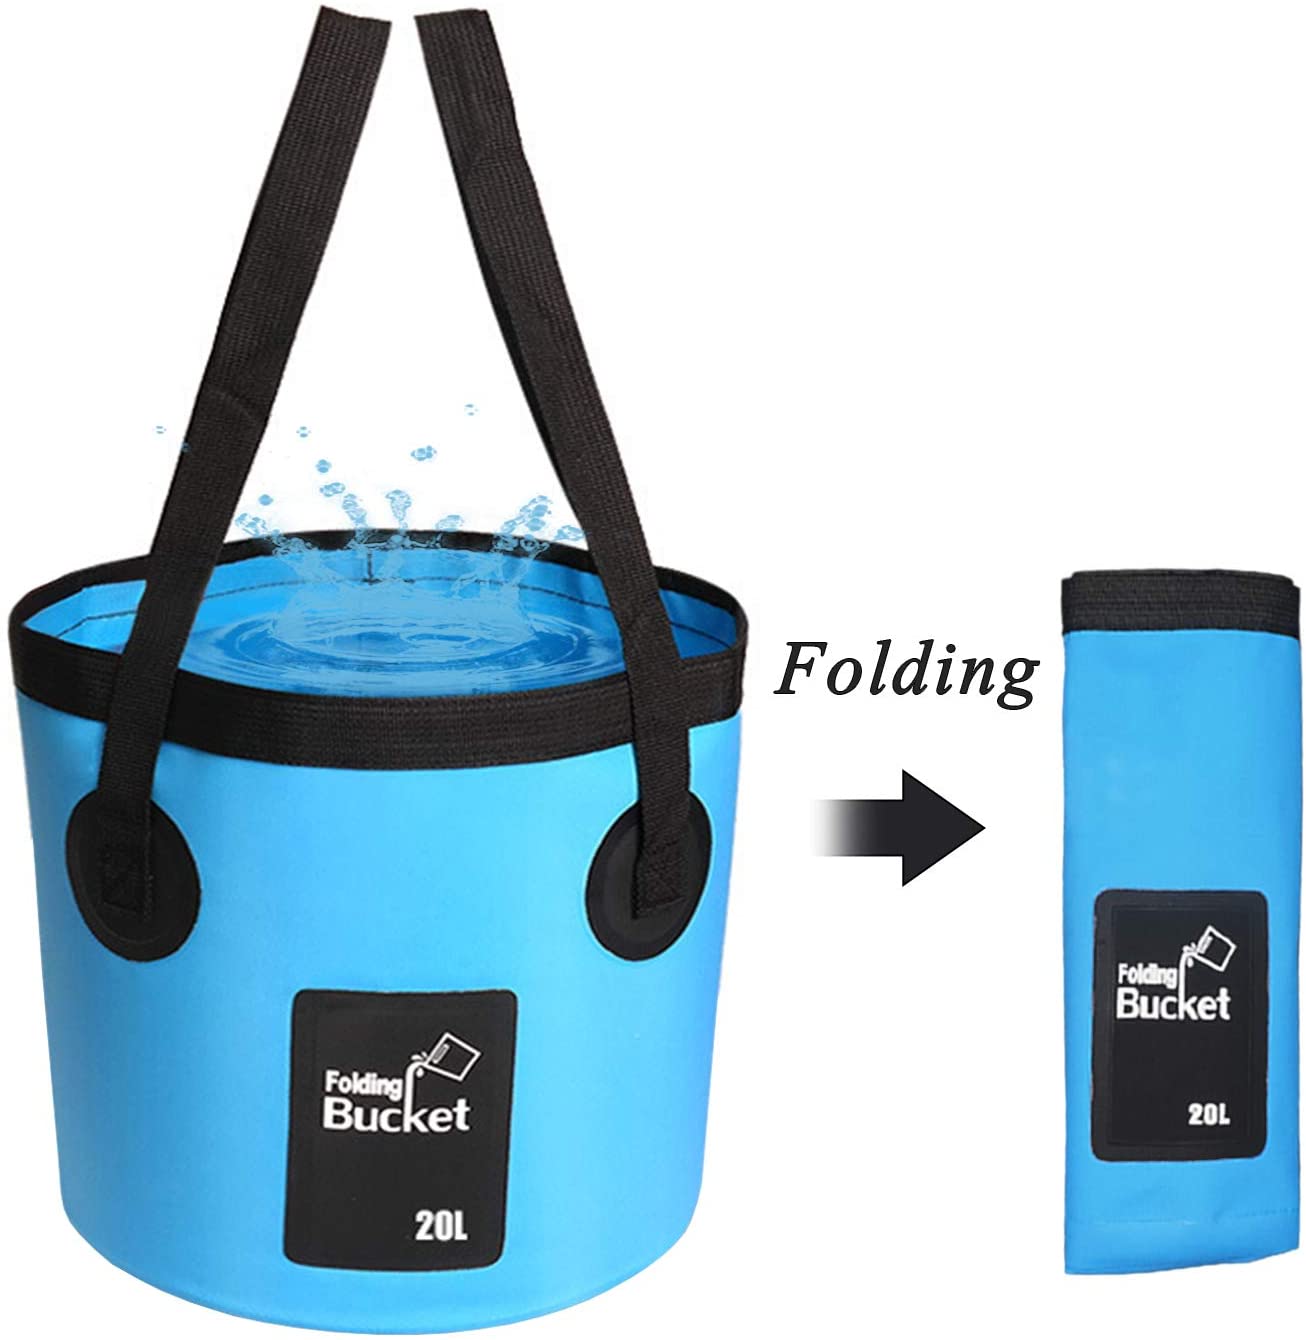 Collapsible Portable Travel Outdoor Folding Washbasin Foldable Buckets Leak-Proof Wash Basin Water Container for Camping Hiking Travelling Fishing Washing 